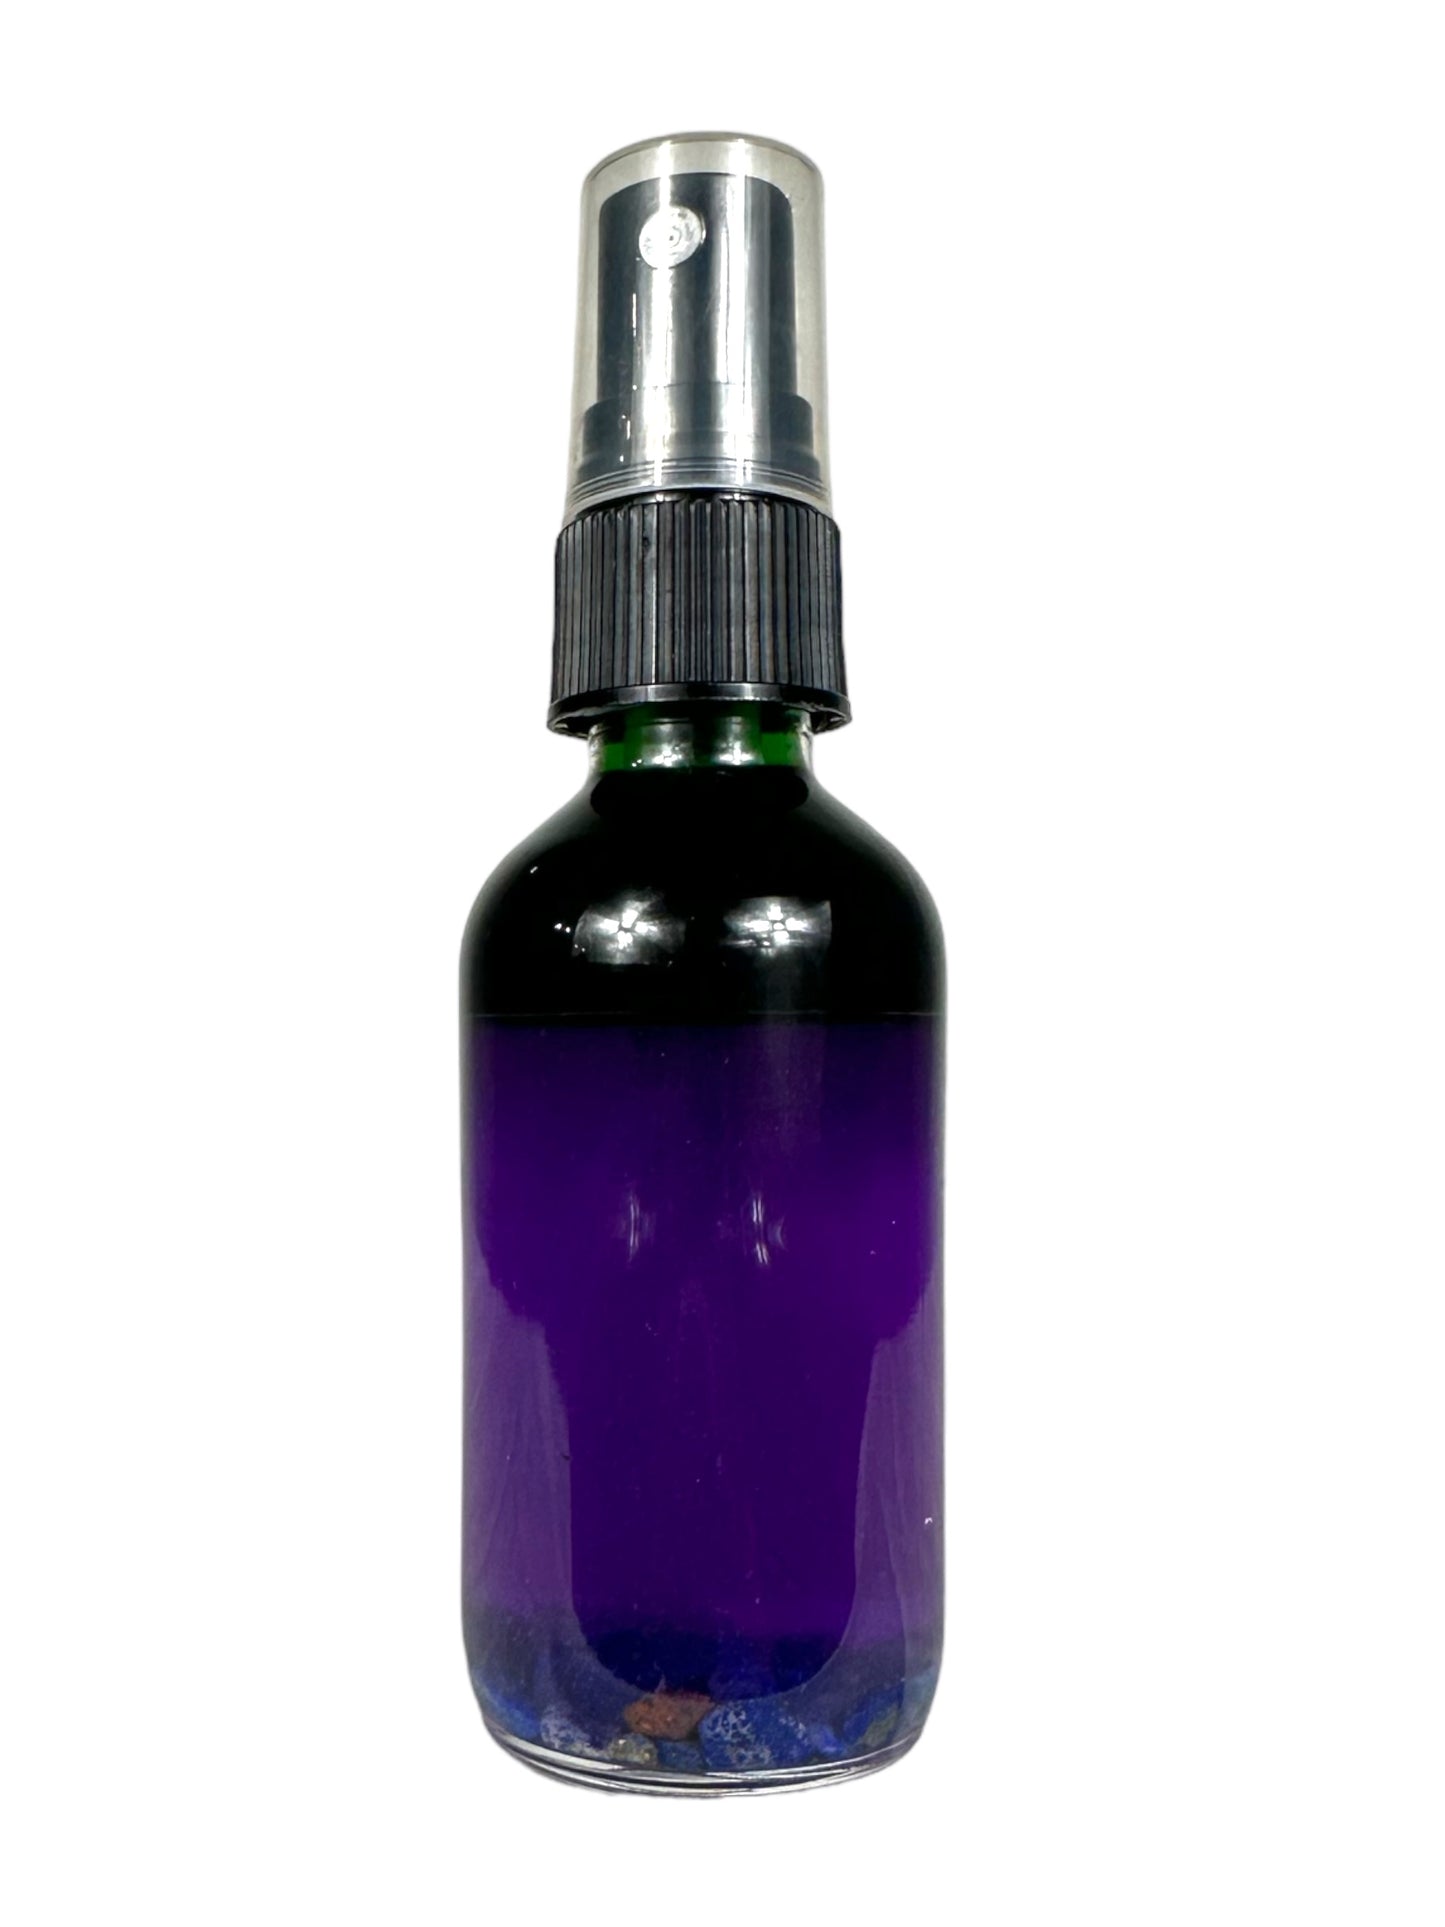 DOMINATION MIST POWER, CONQUER AND REMOVE BLOCKAGES